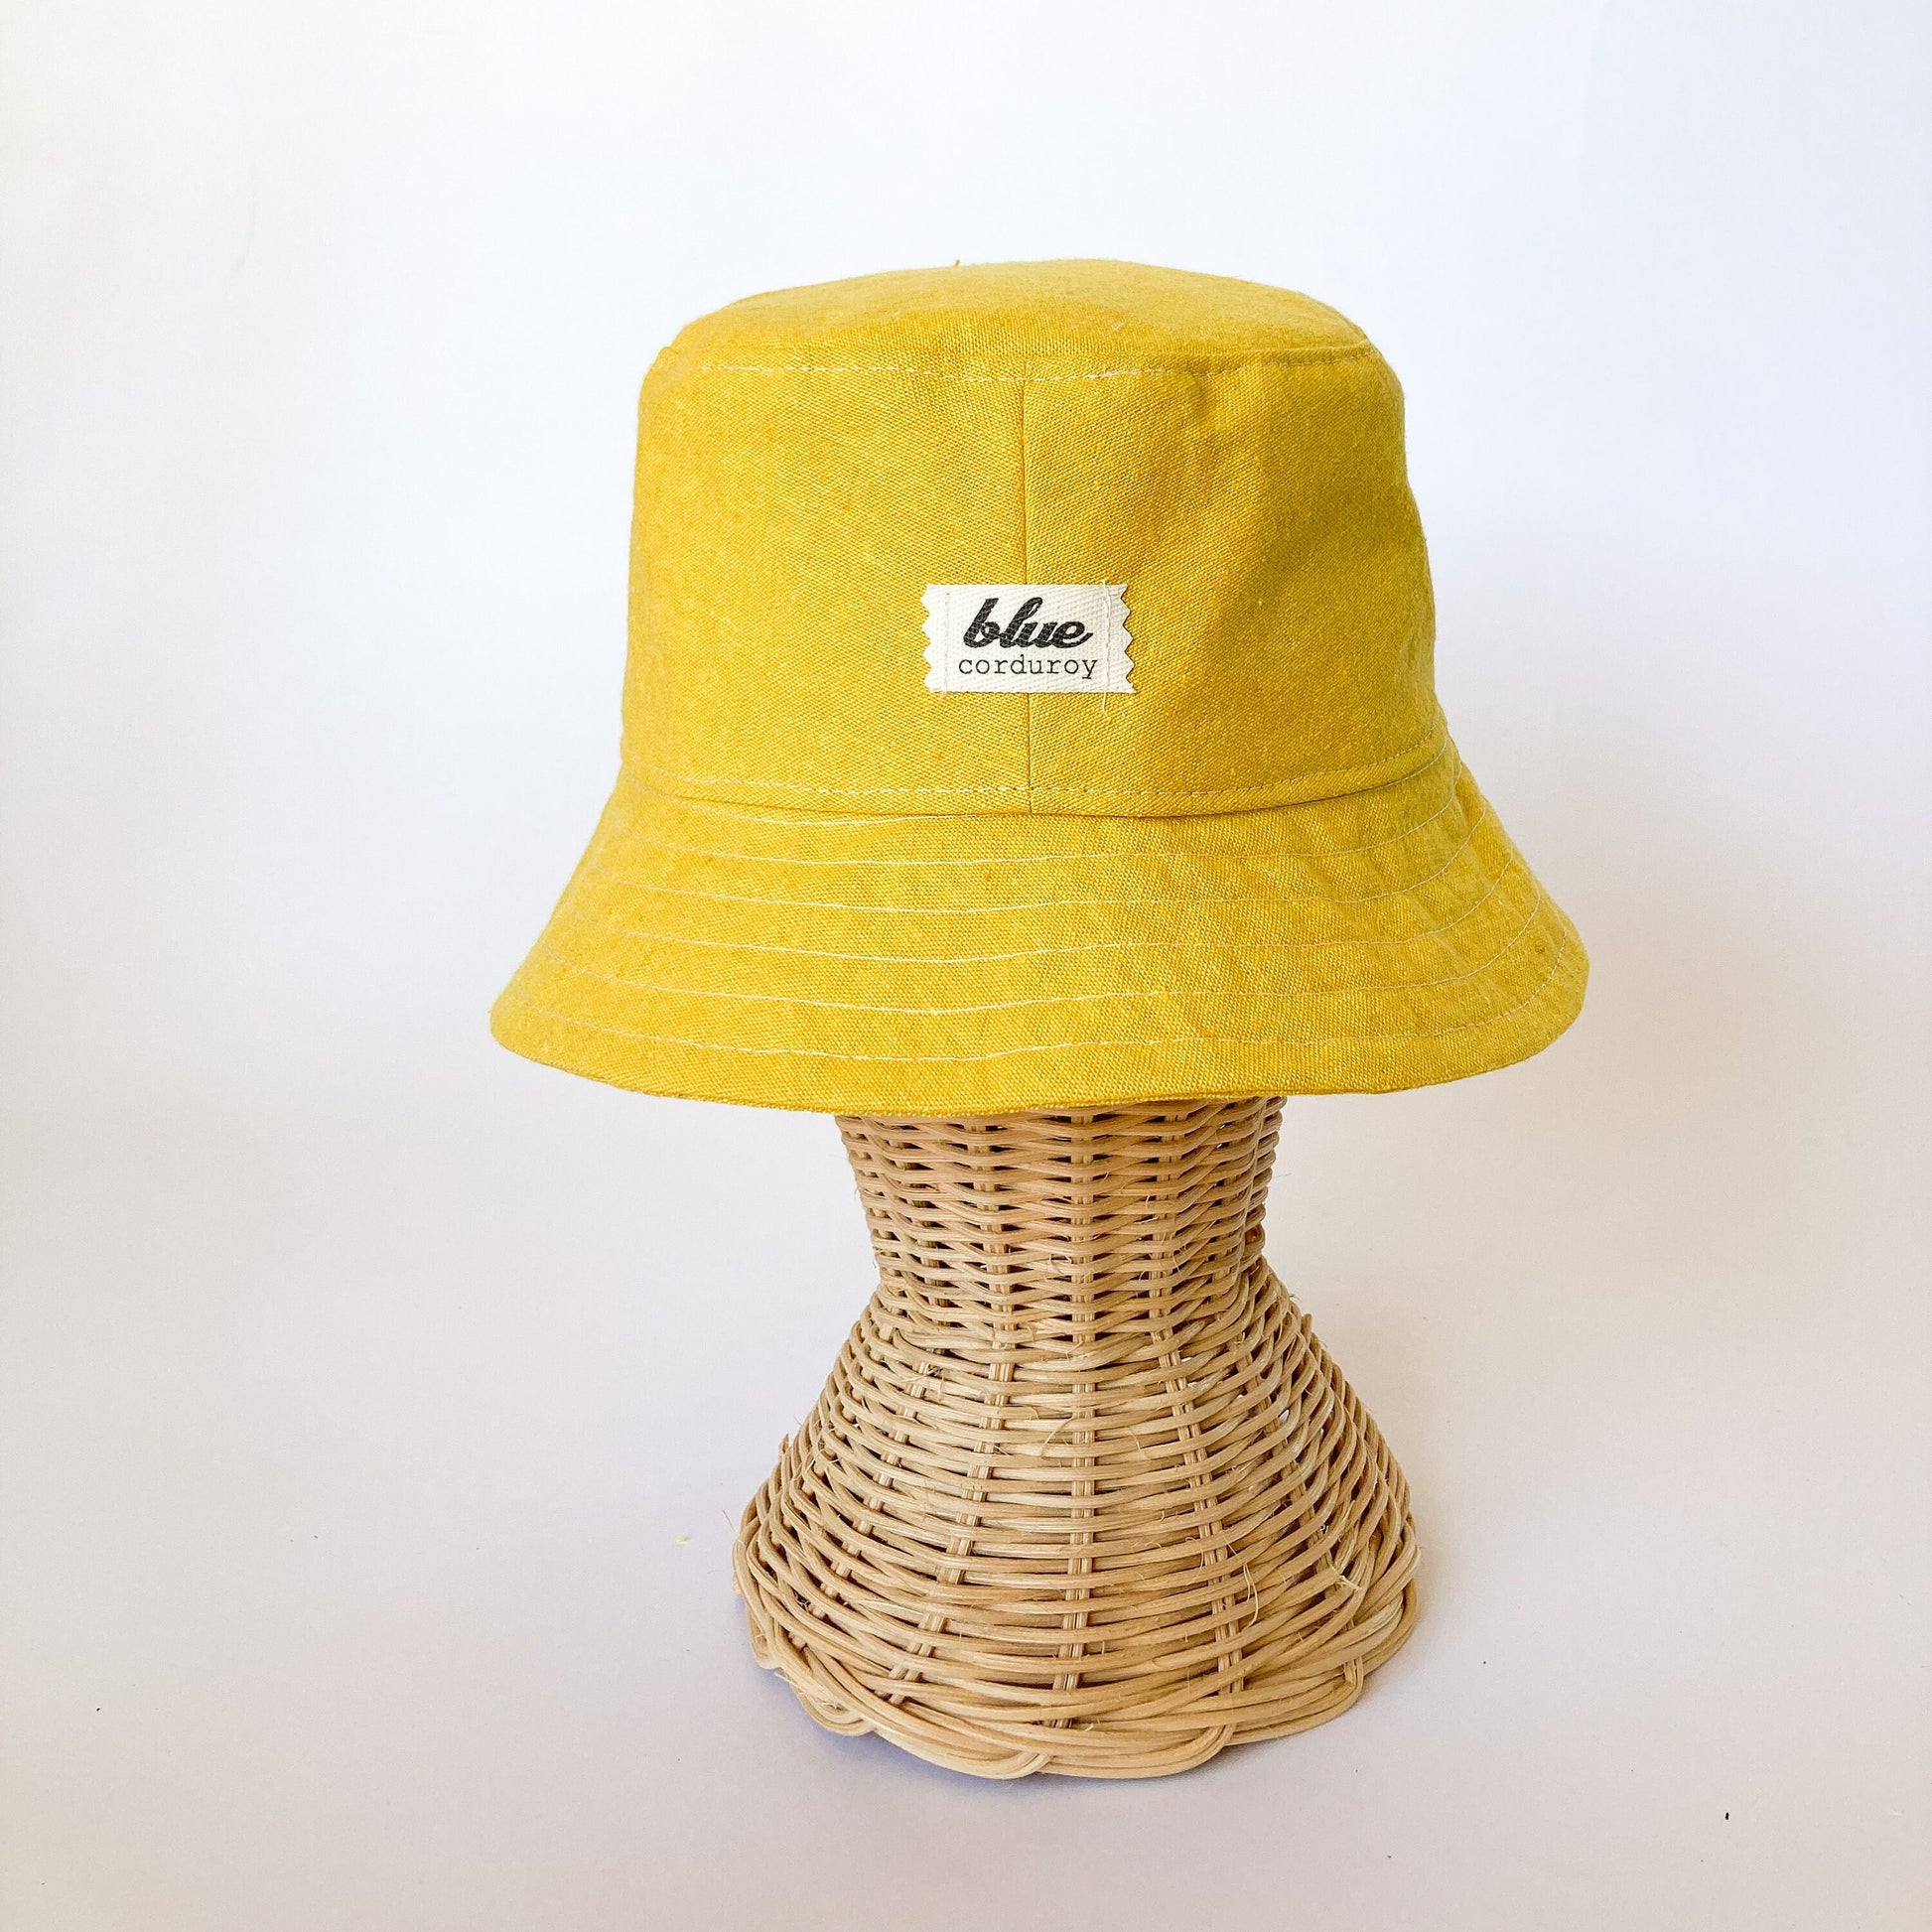 Matching Mommy and Baby Hats, Mama and Mini Hat Set, Yellow Sun Hat, Bucket Hat, Baby Beach Hat, Summer Newborn Gift, Linen Hat